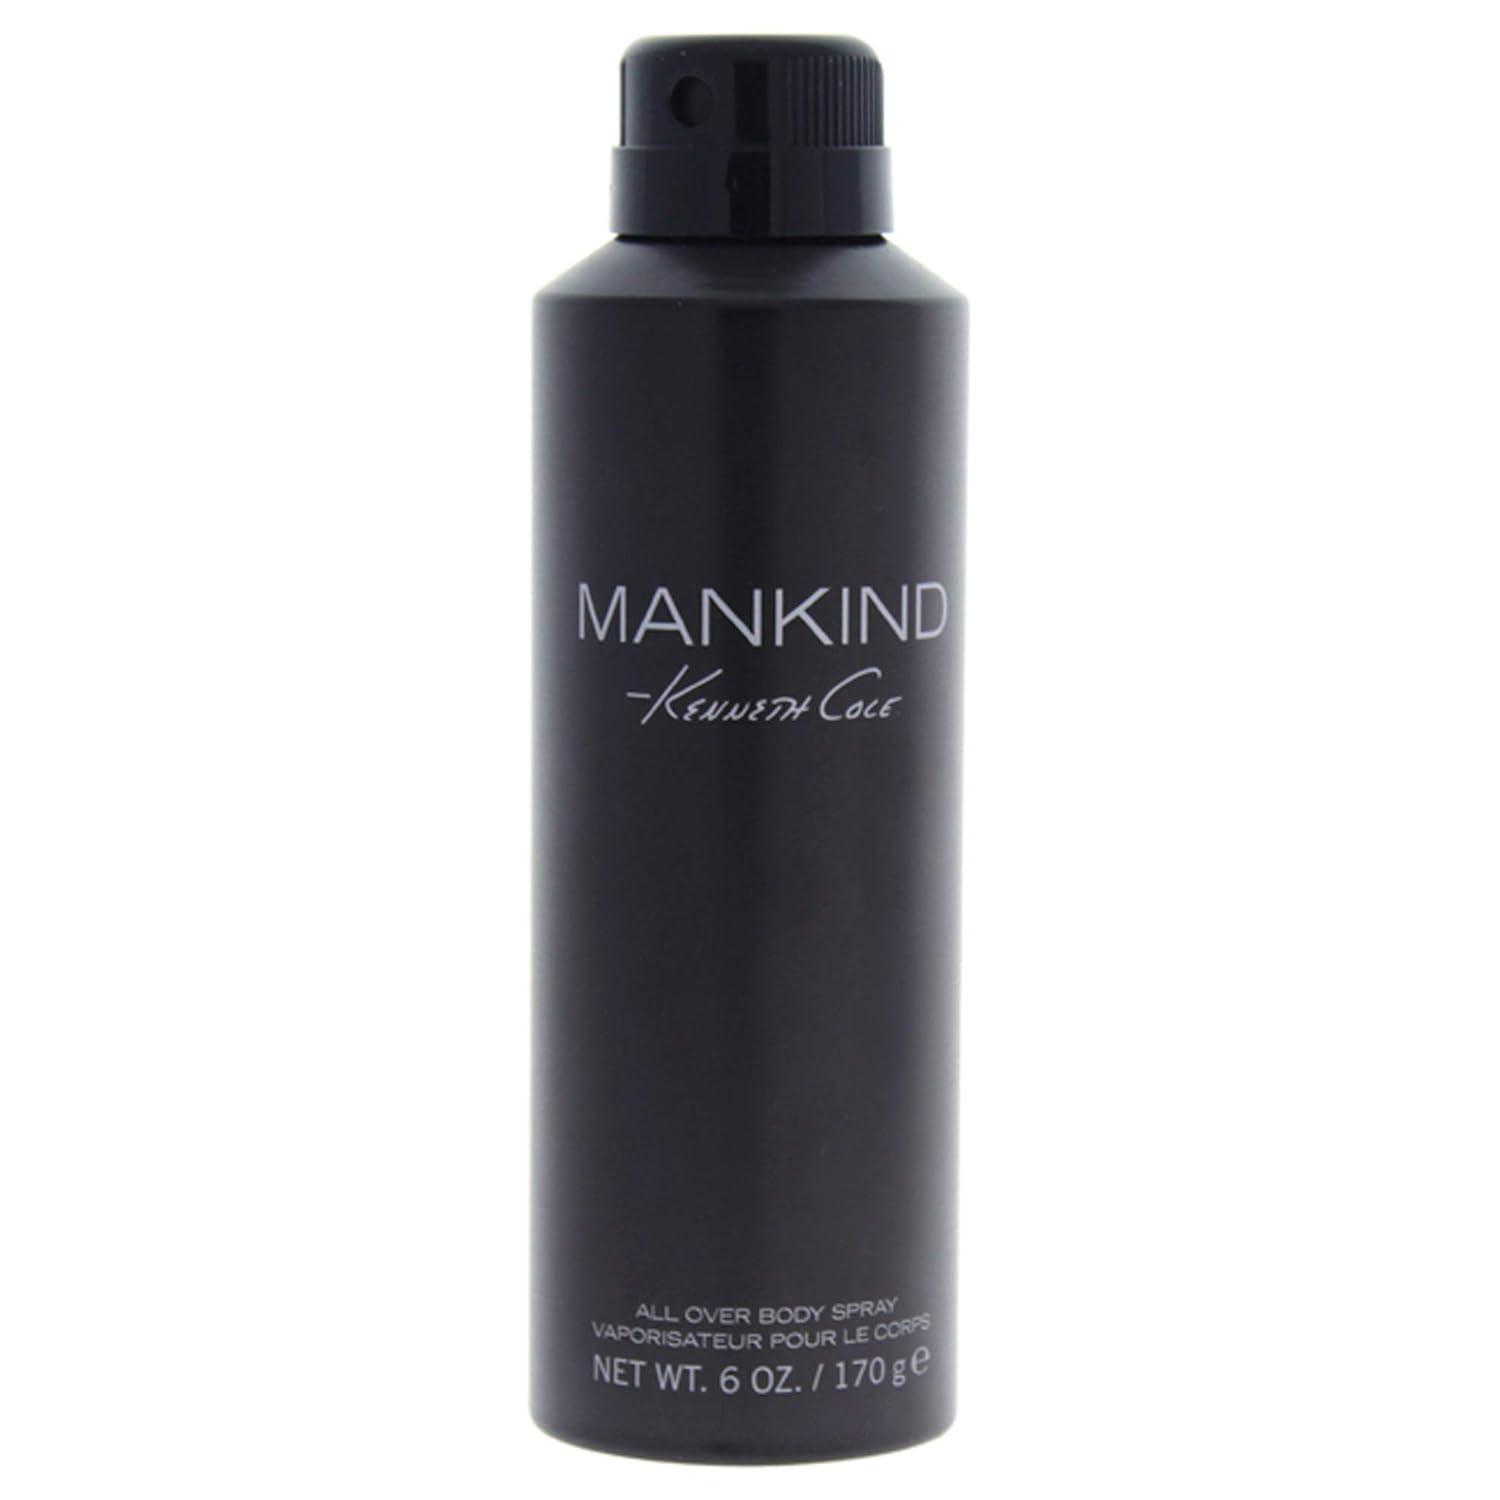 Kenneth Cole Mankind Body Spray for Men for $6.75